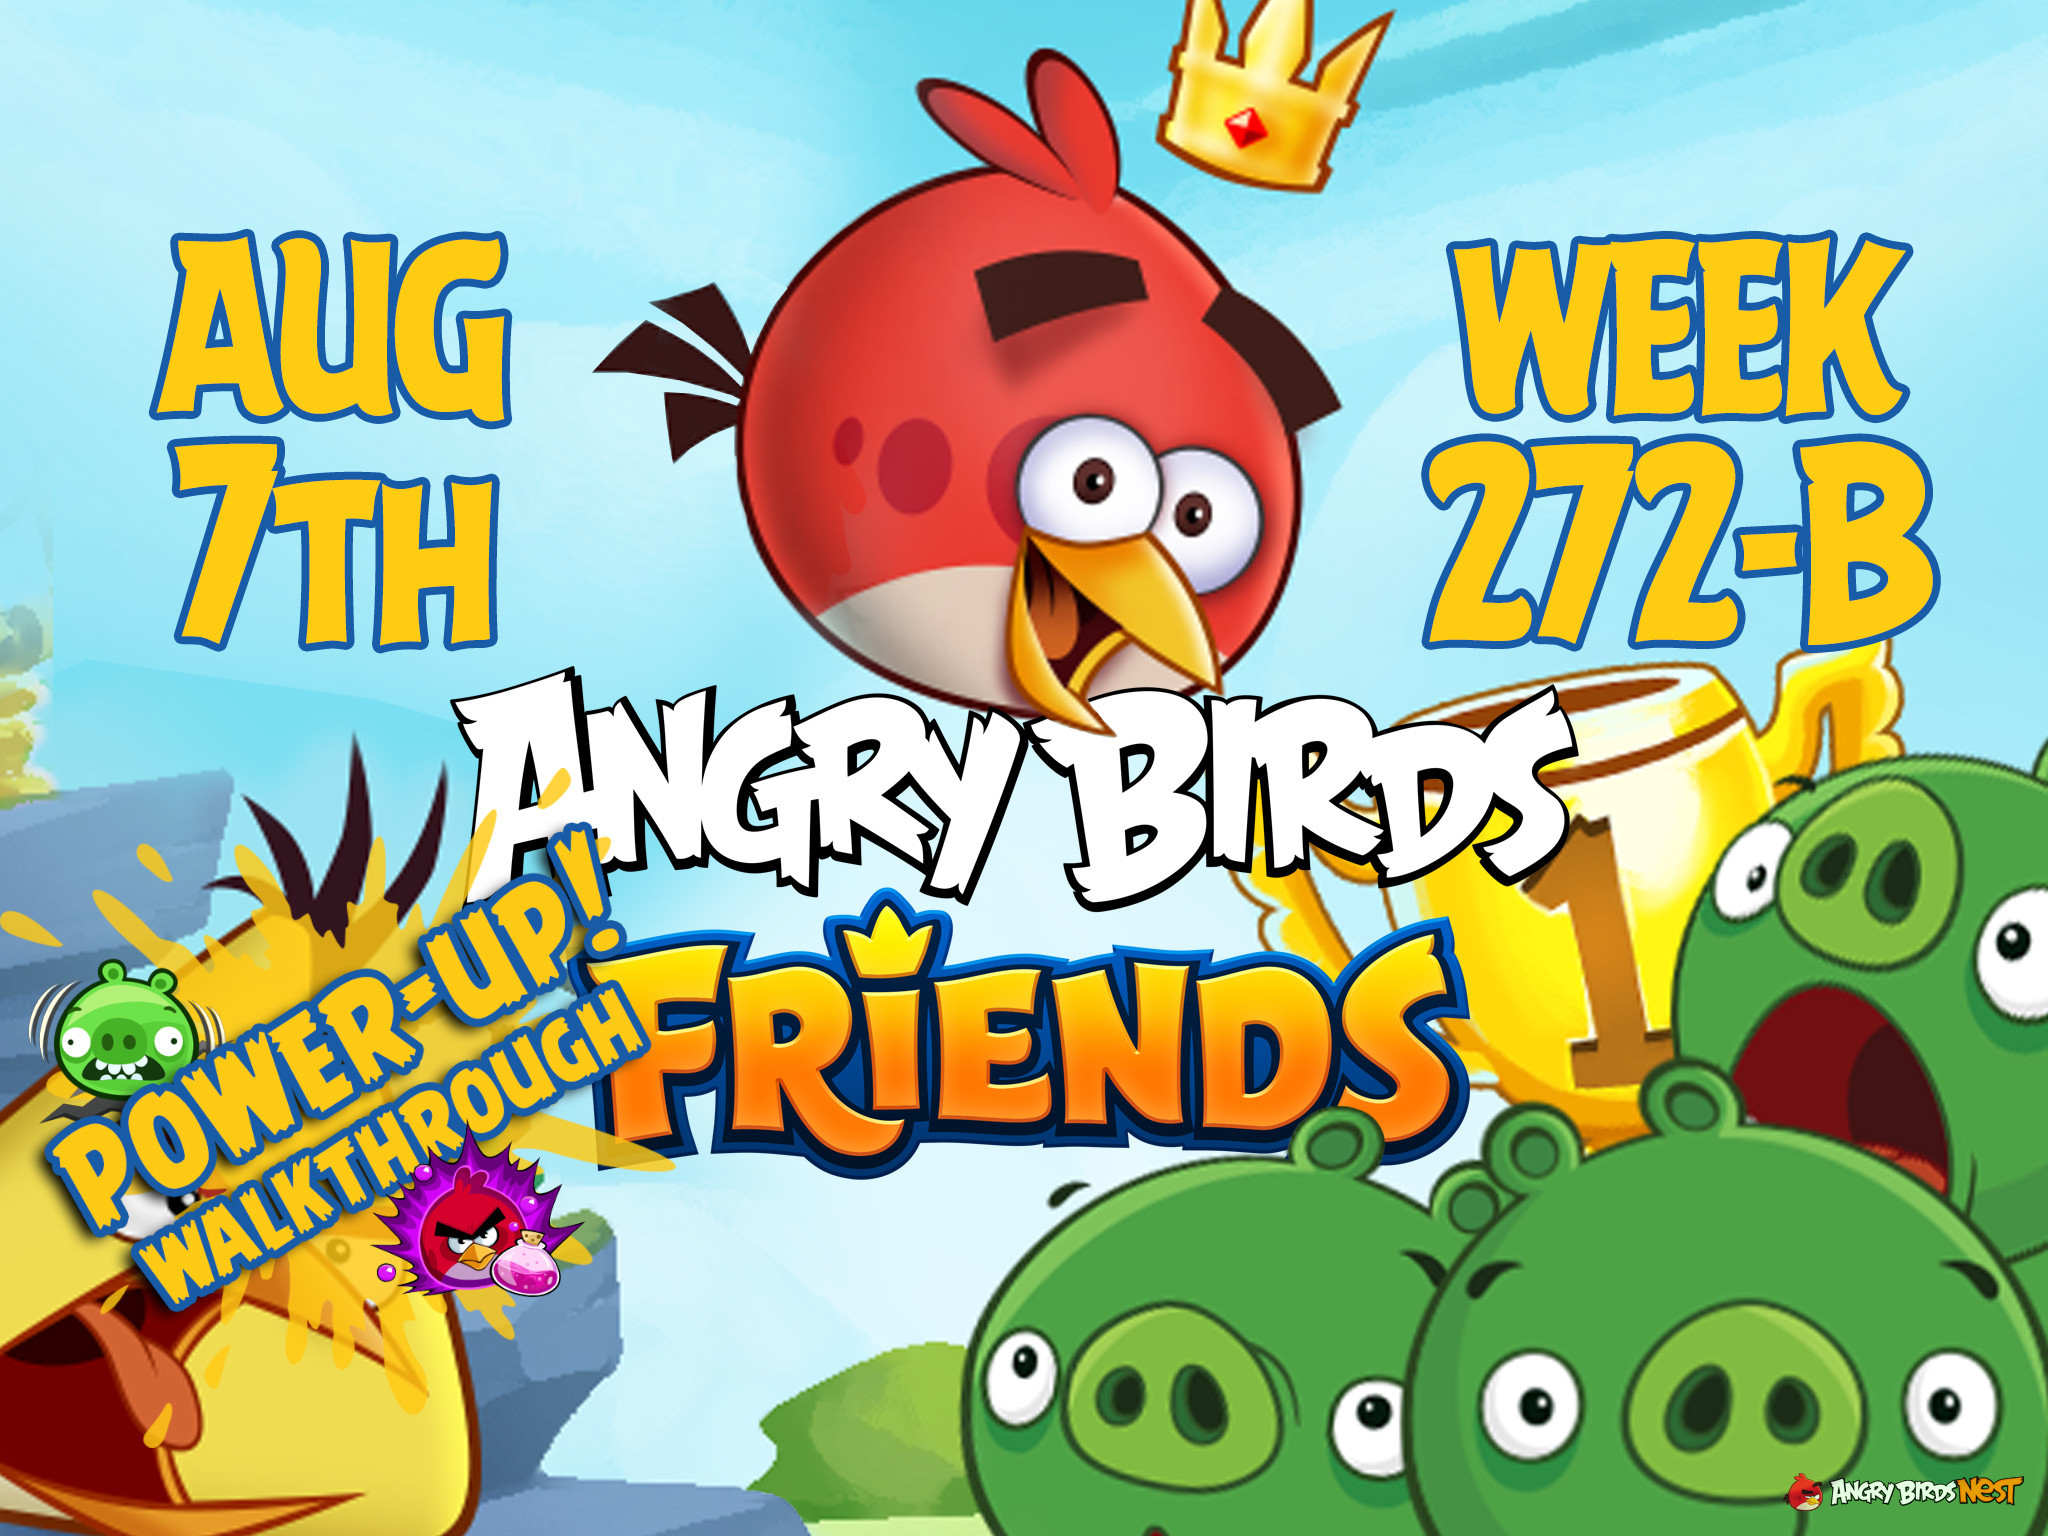 Angry Birds Friends Tournament Week 272-B Feature Image PU